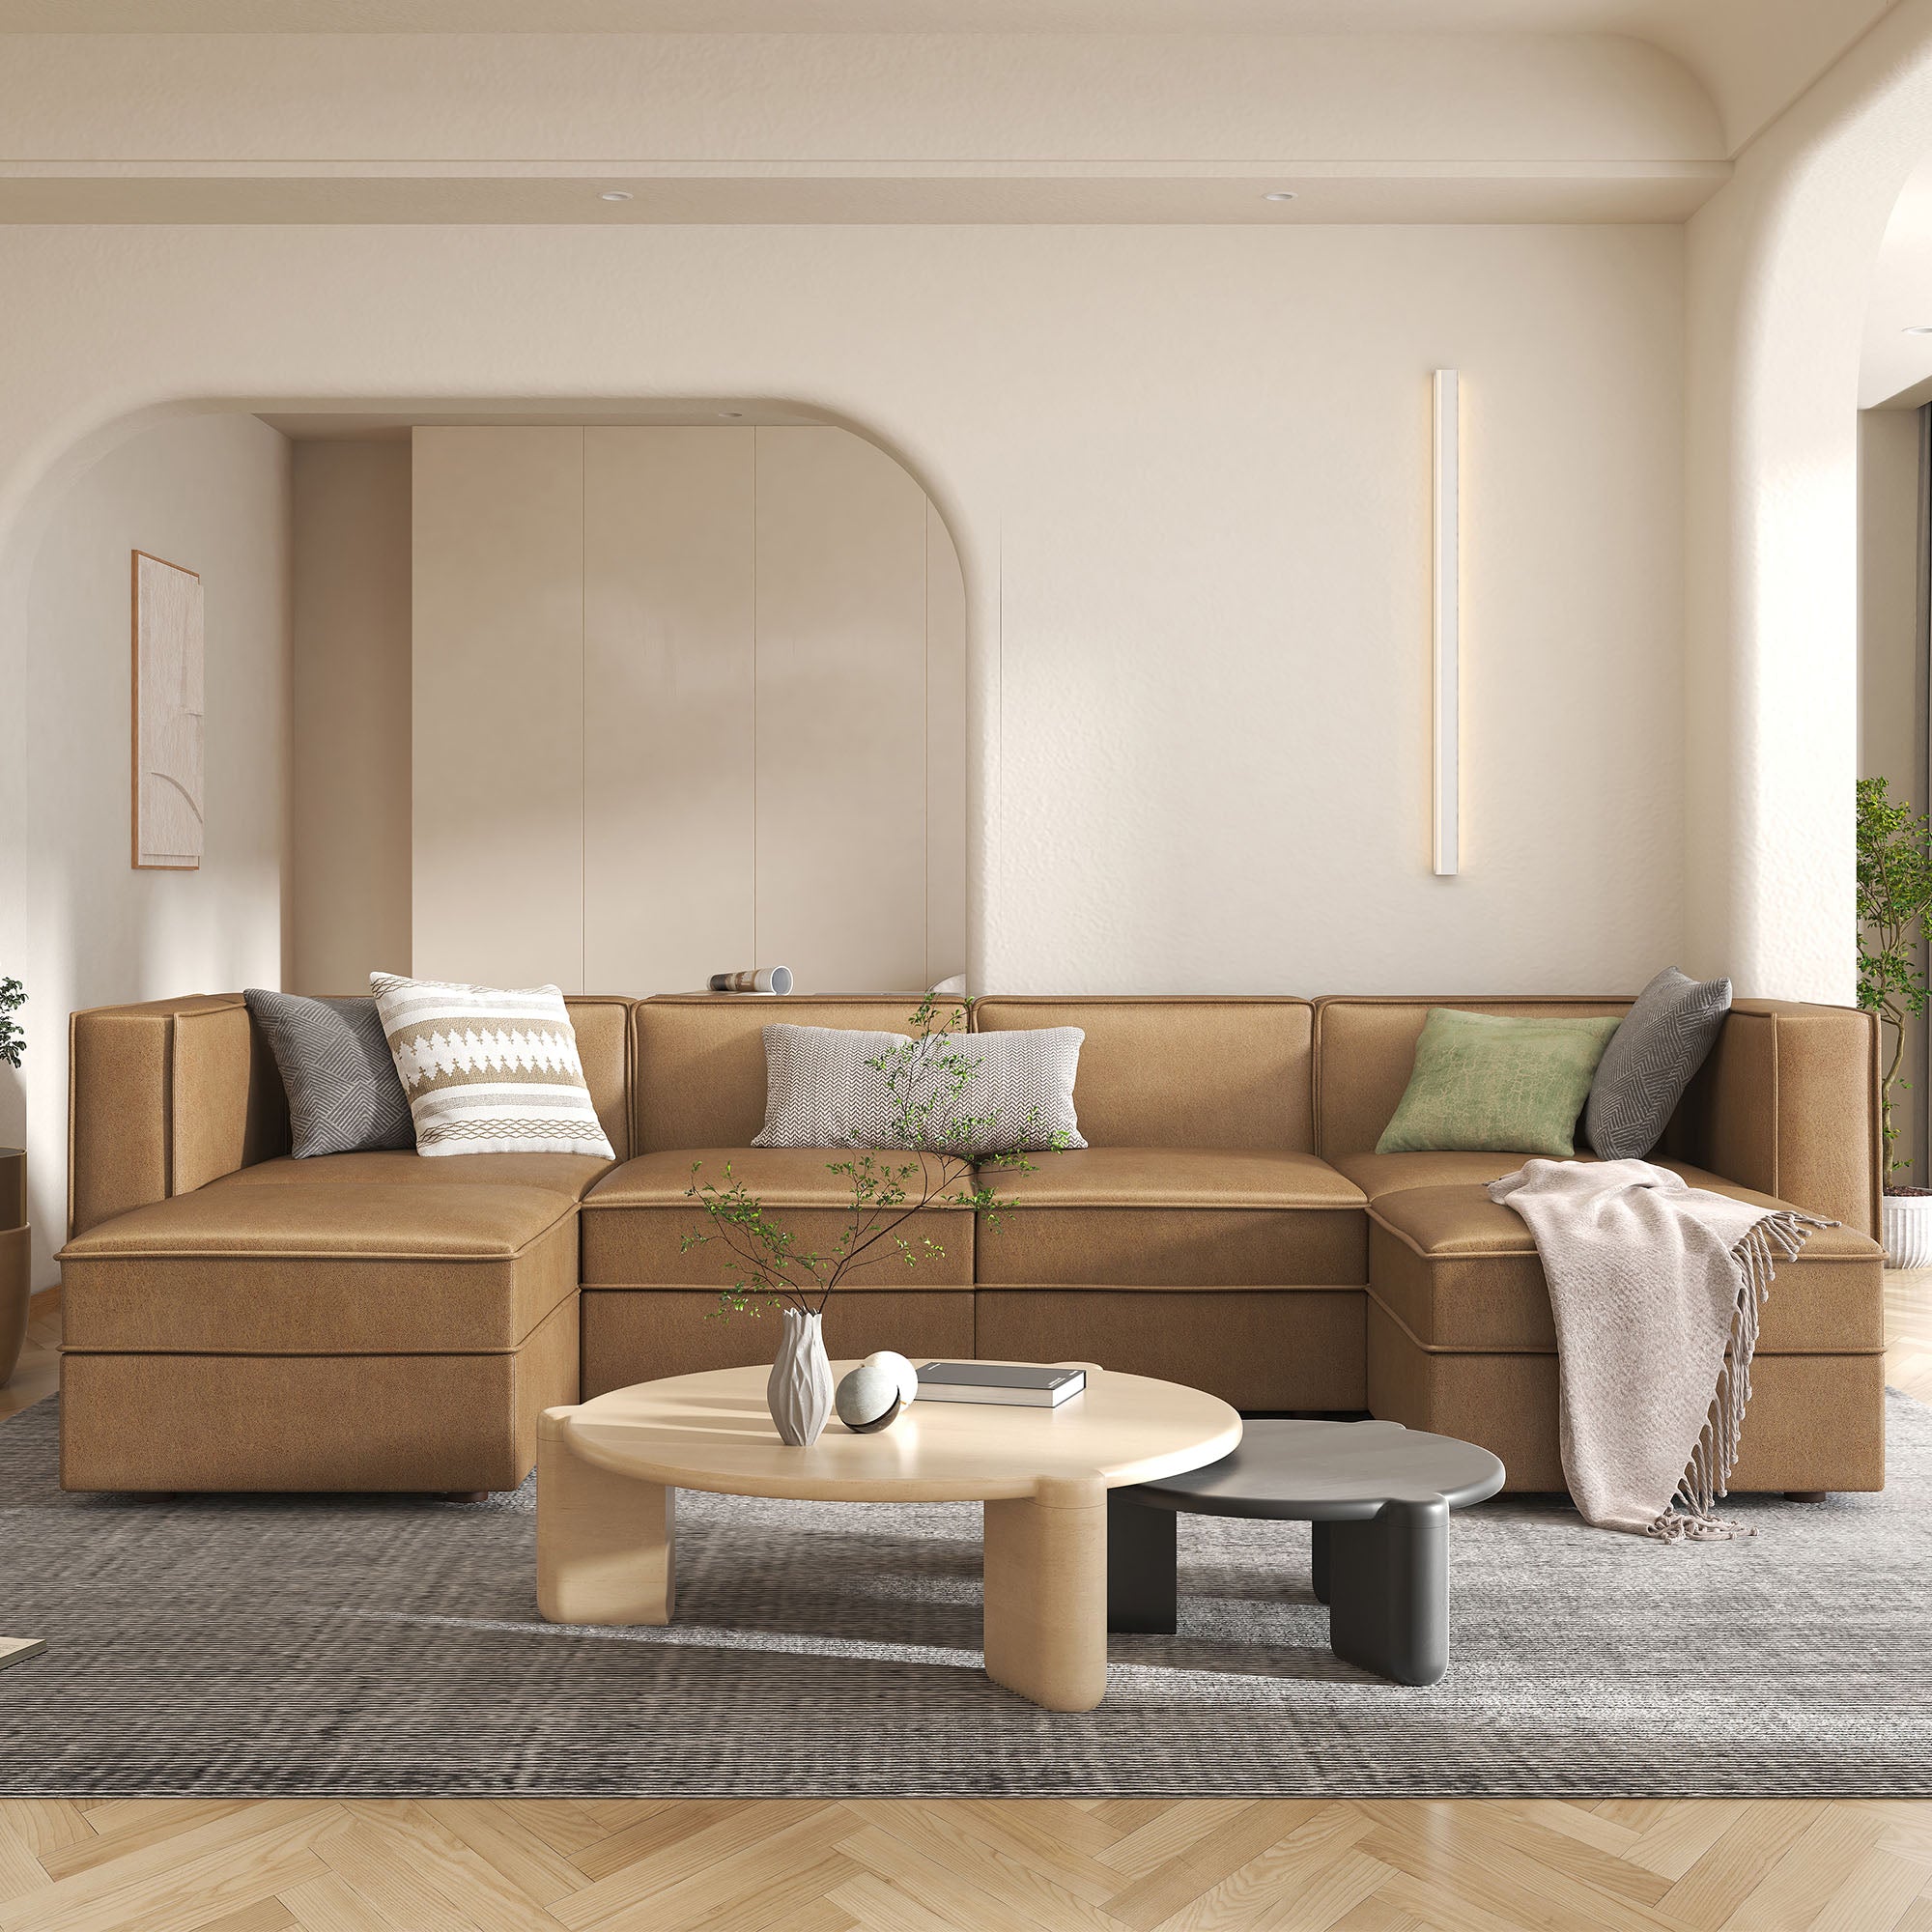 Reasons to Buy a Leathaire Modular Sofa